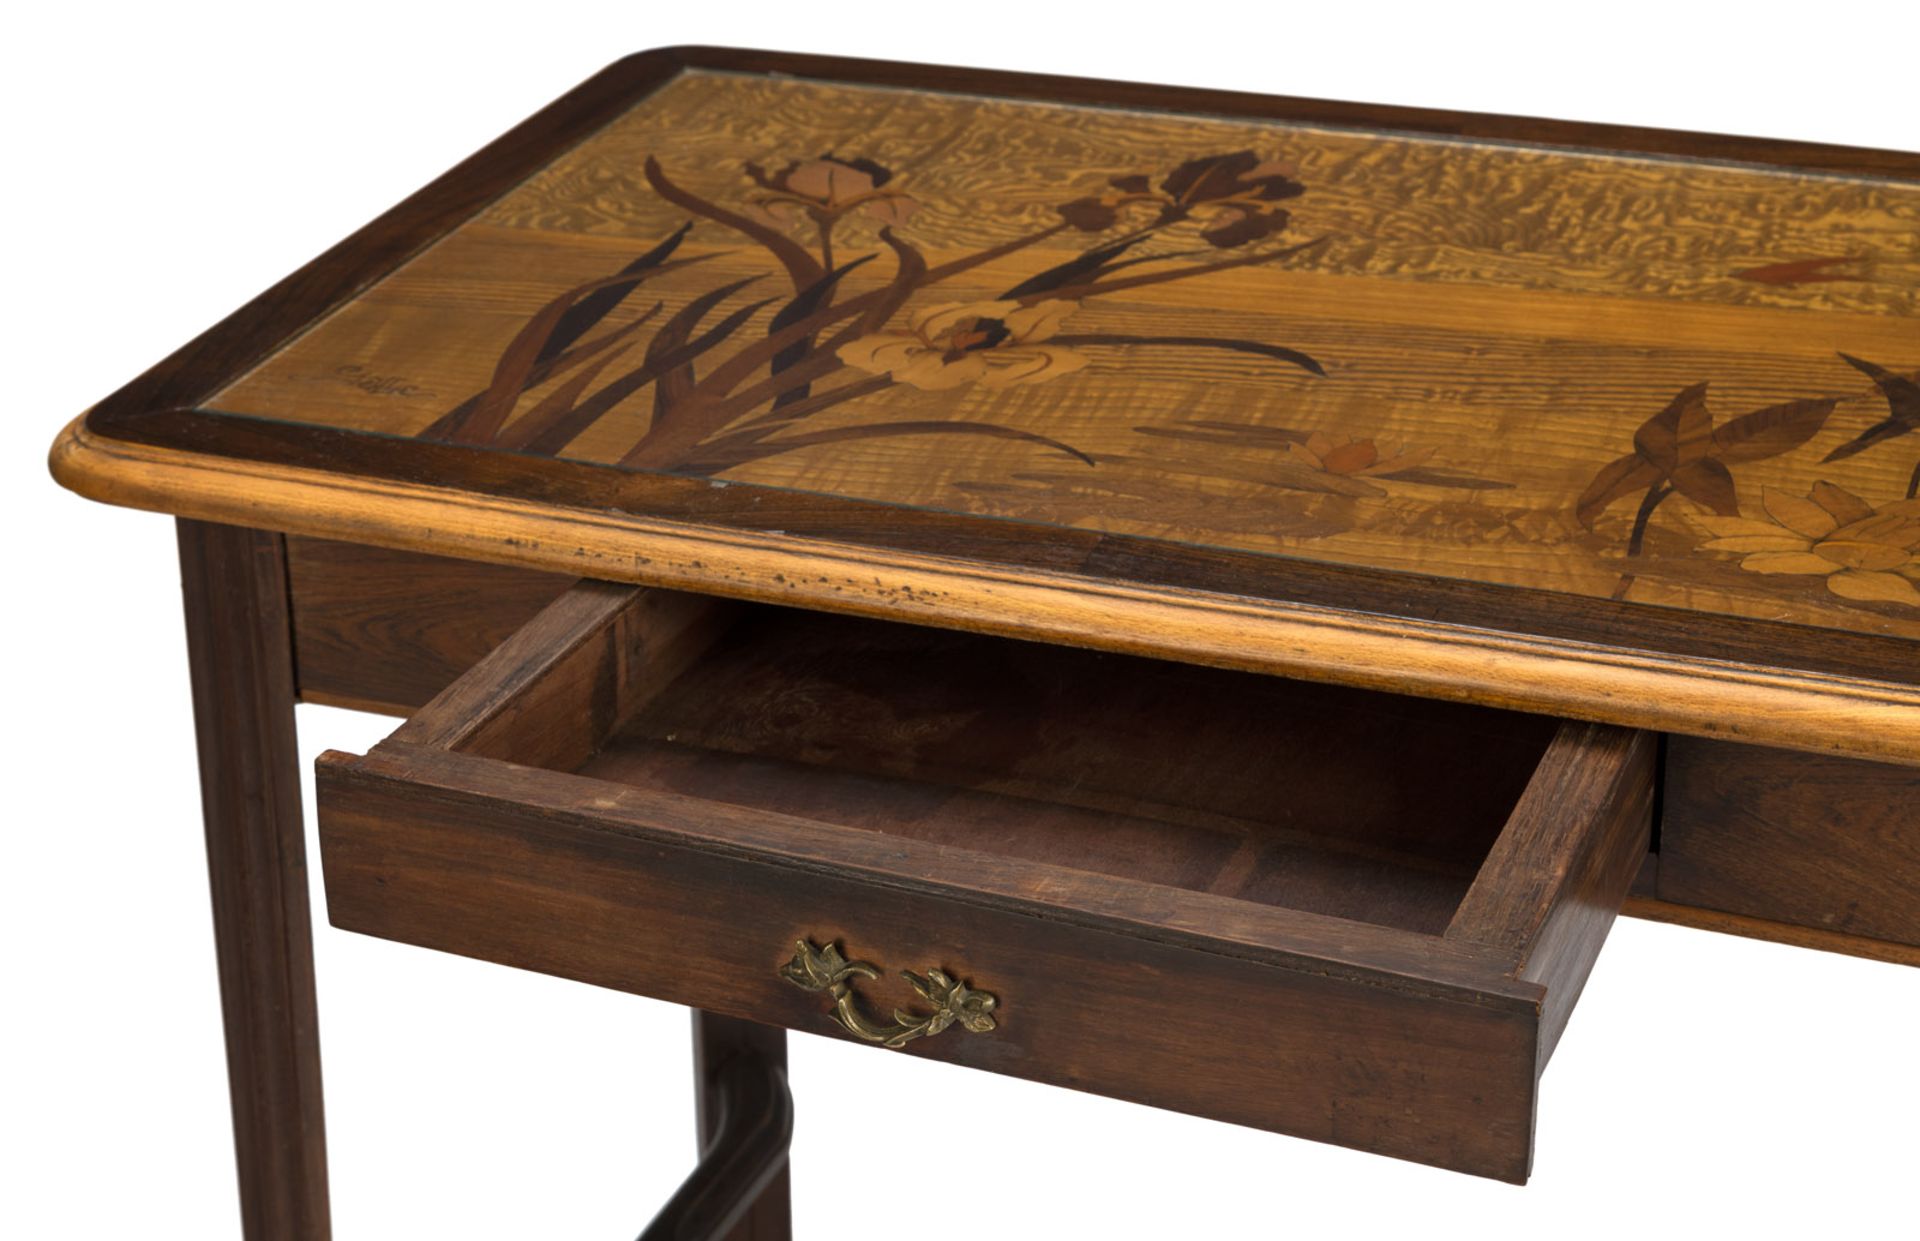 AN ART NOUVEAU FLORAL TOOLED PALISANDER, OAKWOOD, MAHOGANY, ROOTWOOD AND ASH WRITING DESK - Image 3 of 8